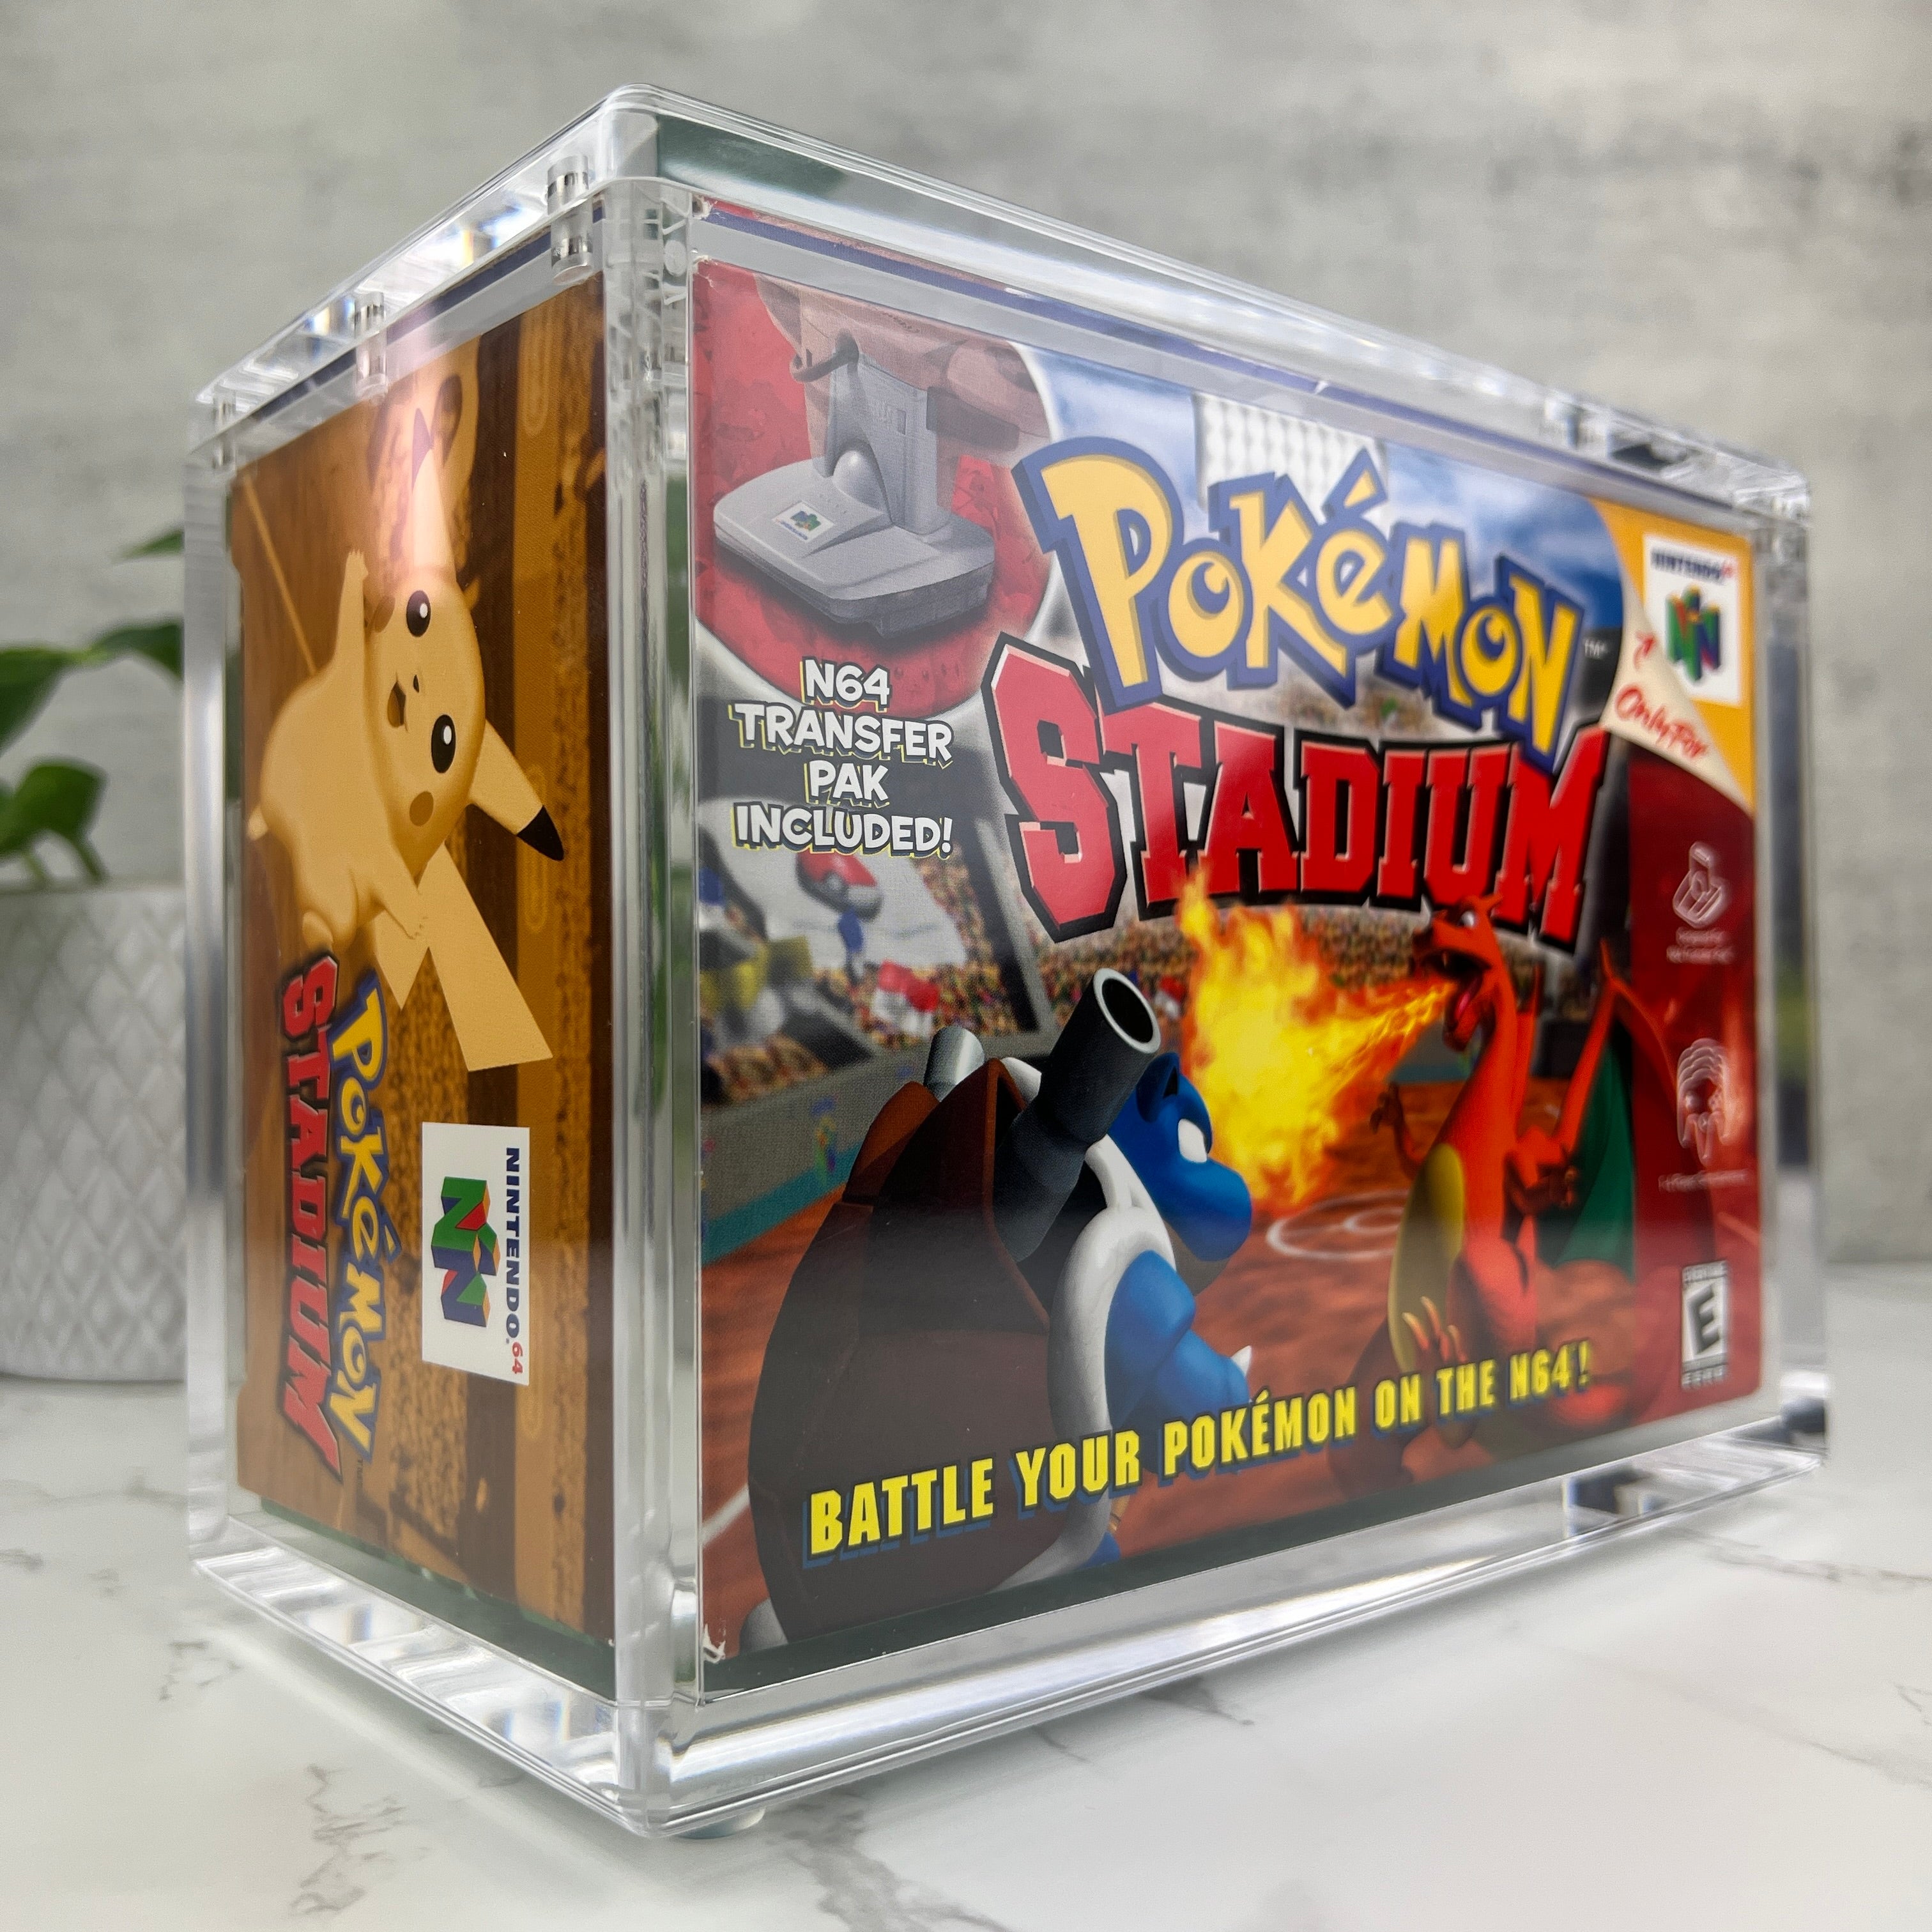 Pokemon Stadium acrylic display cases are custom designed with strong neodymium magnets, UV resistant coating, maximum transparency and thick walls for years of heavy, trustworthy protection.